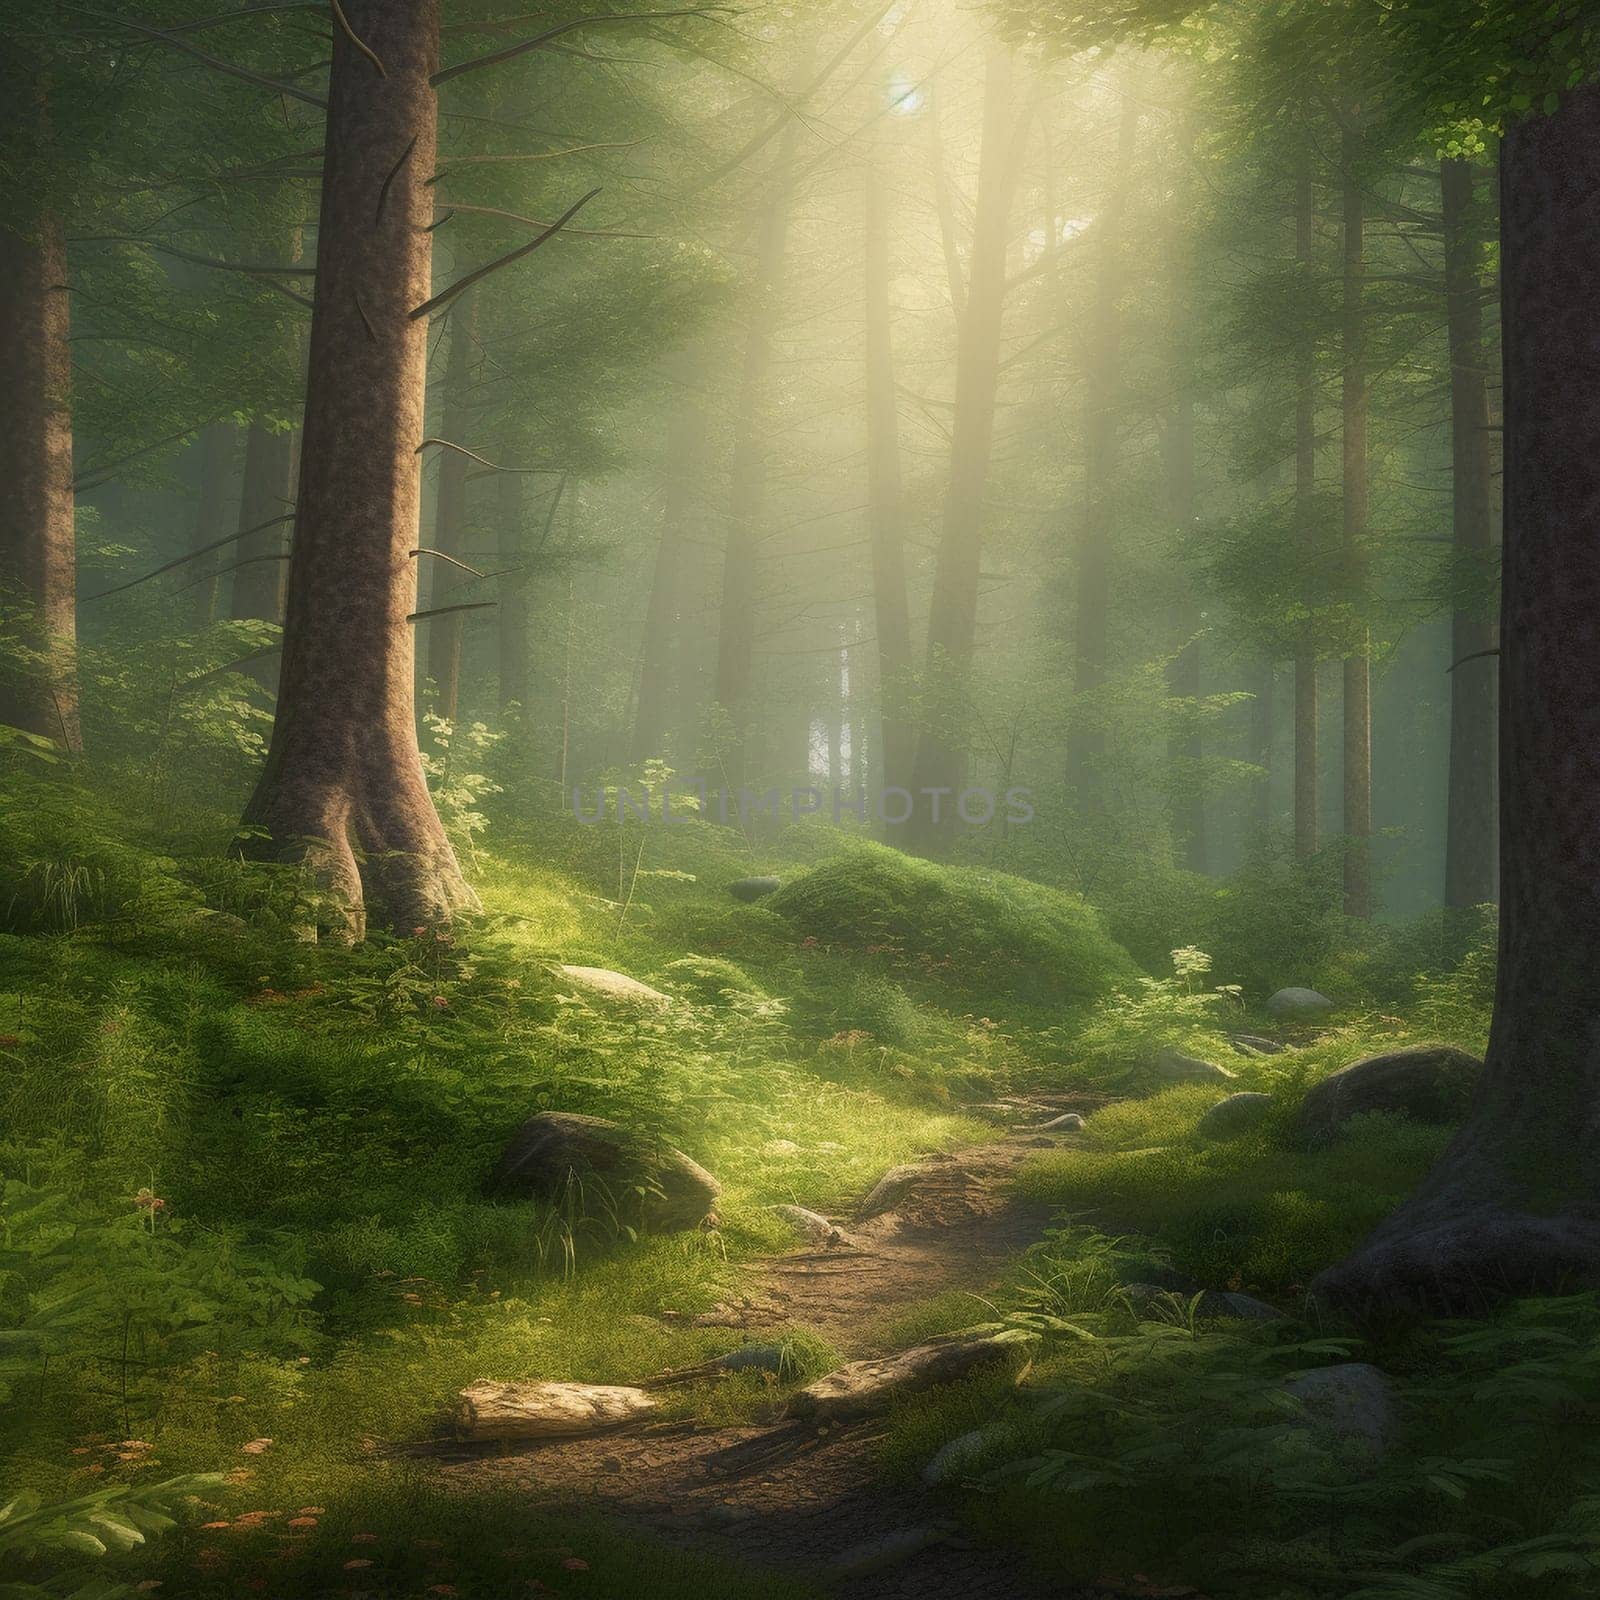 Step into a world of natural beauty and serenity with this stunning forest scene. The forest could be dense and lush, with tall trees and soft undergrowth that invite exploration and contemplation. There's a sense of calm and tranquility that permeates the scene, with the sounds of birds and rustling leaves in the background. This is a place to escape from the stress of everyday life and find inner peace.